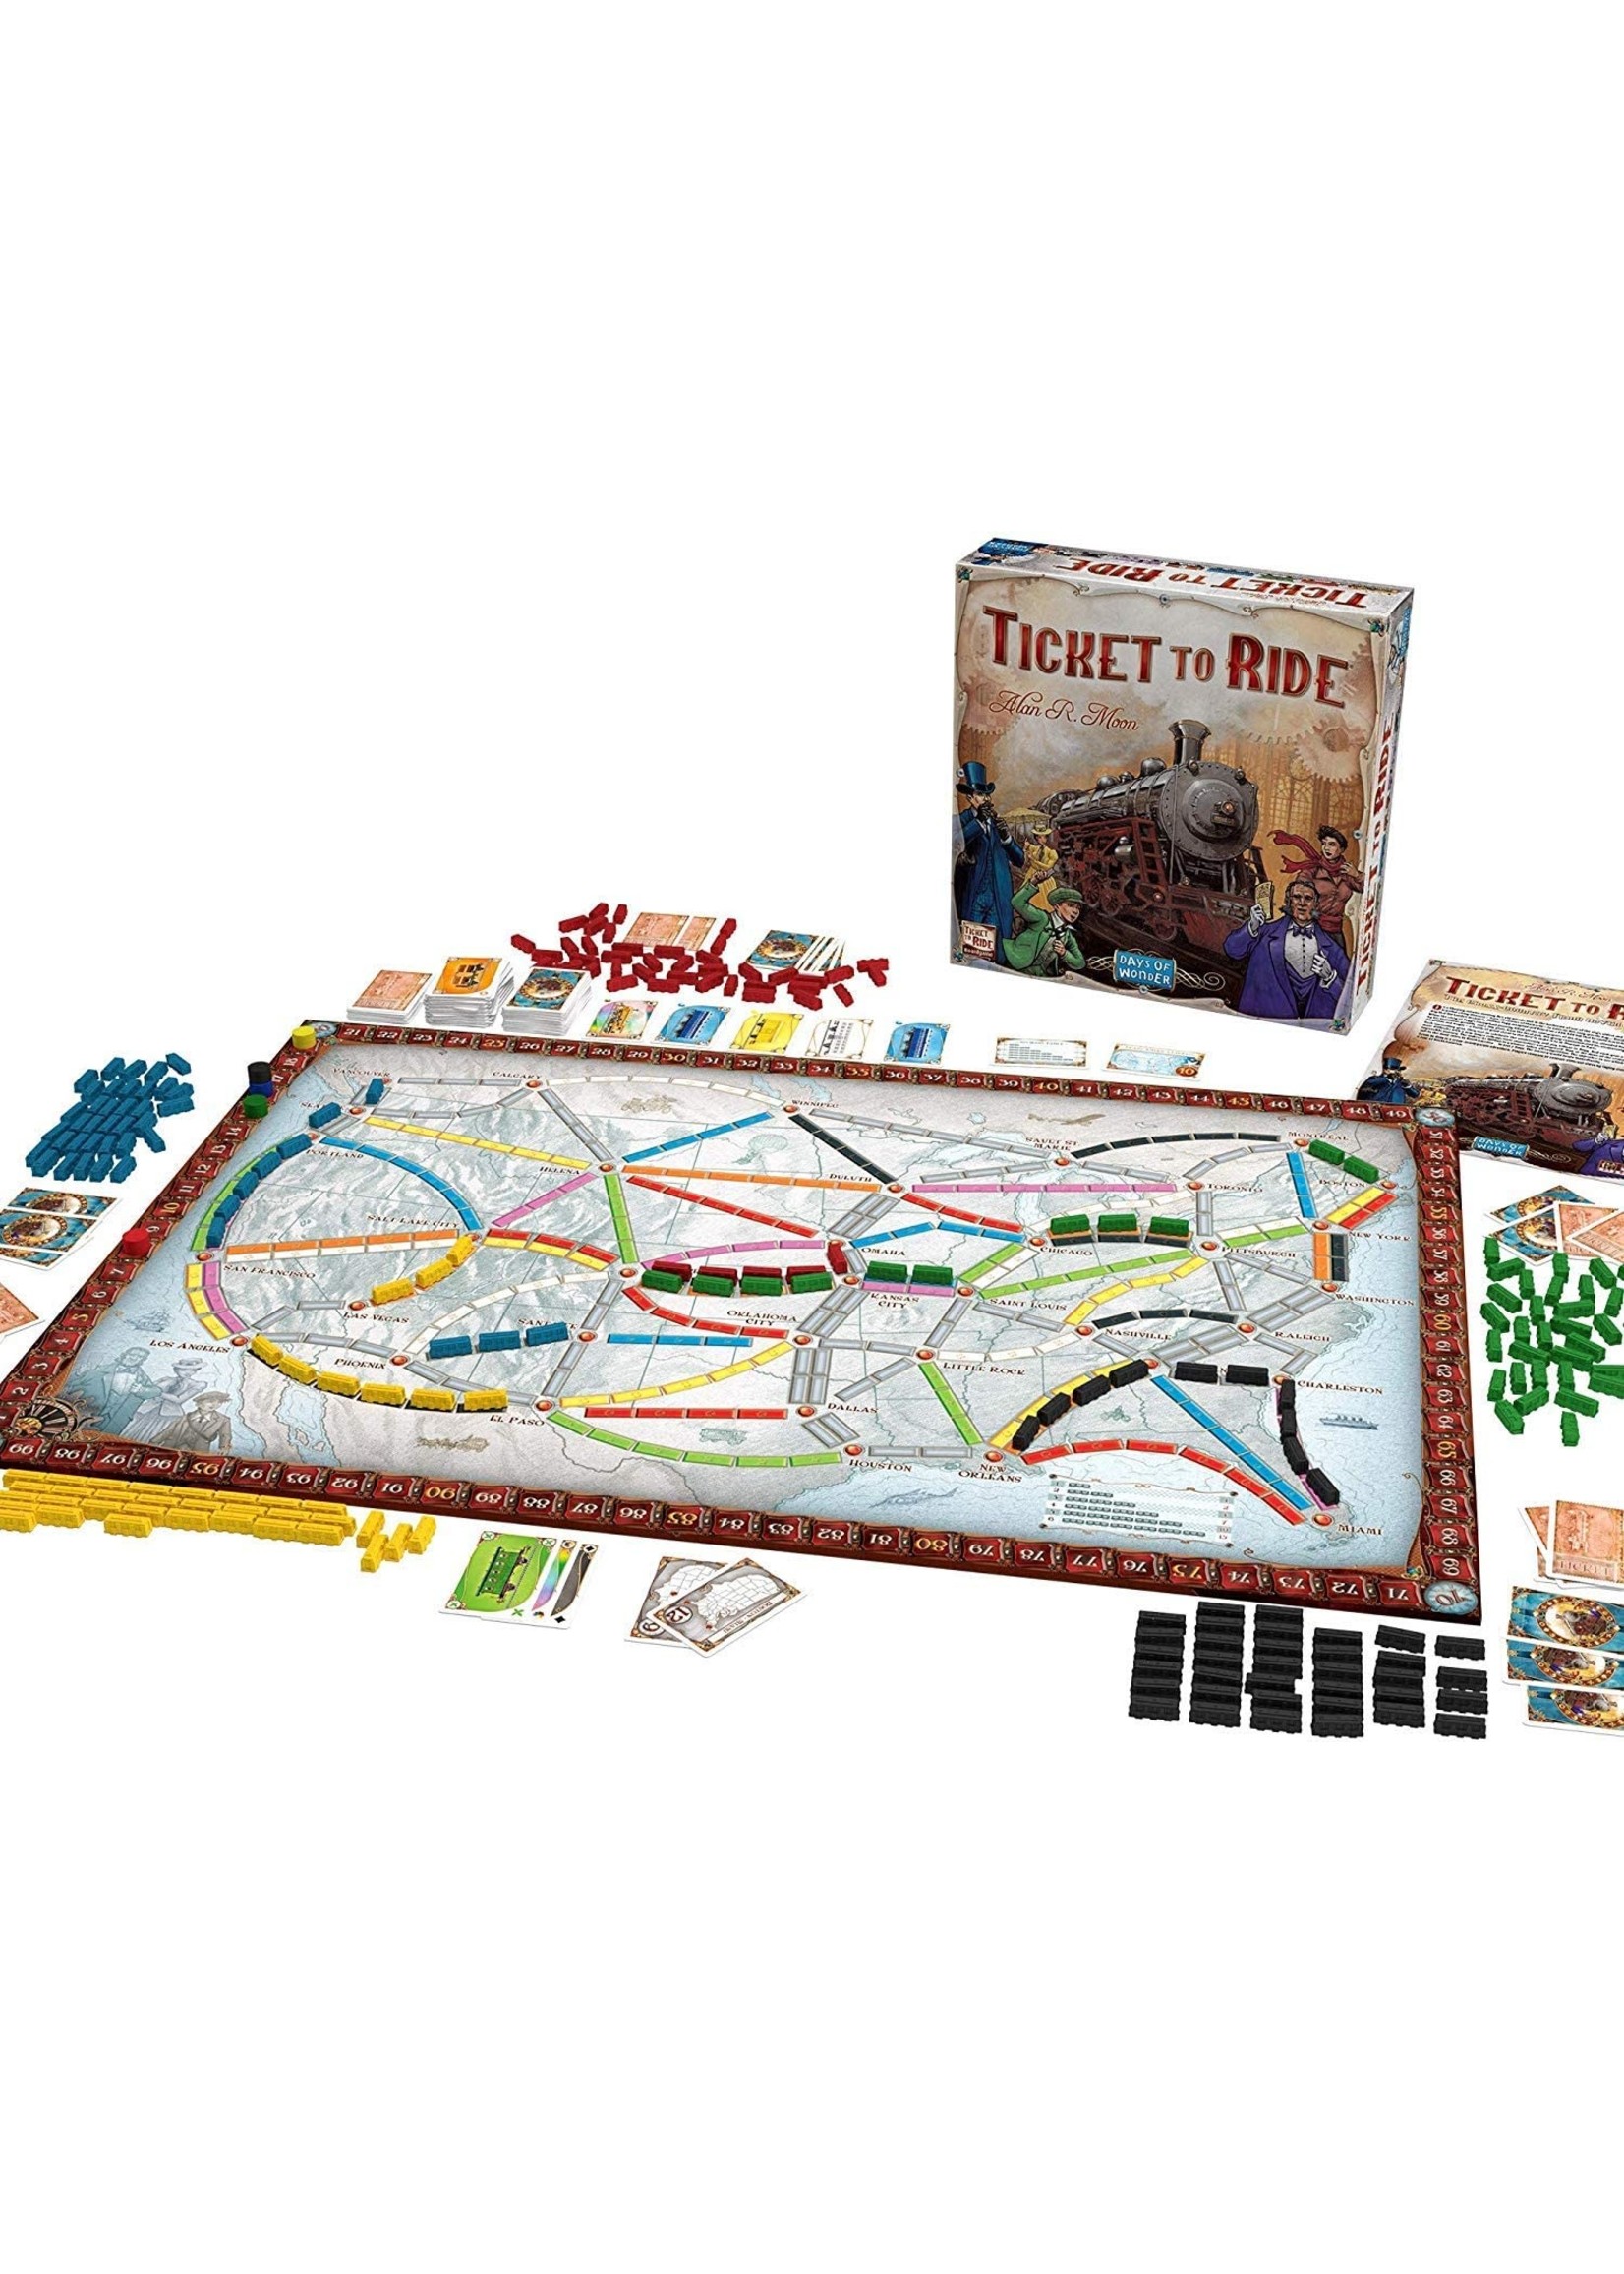 Asmodee Ticket To Ride